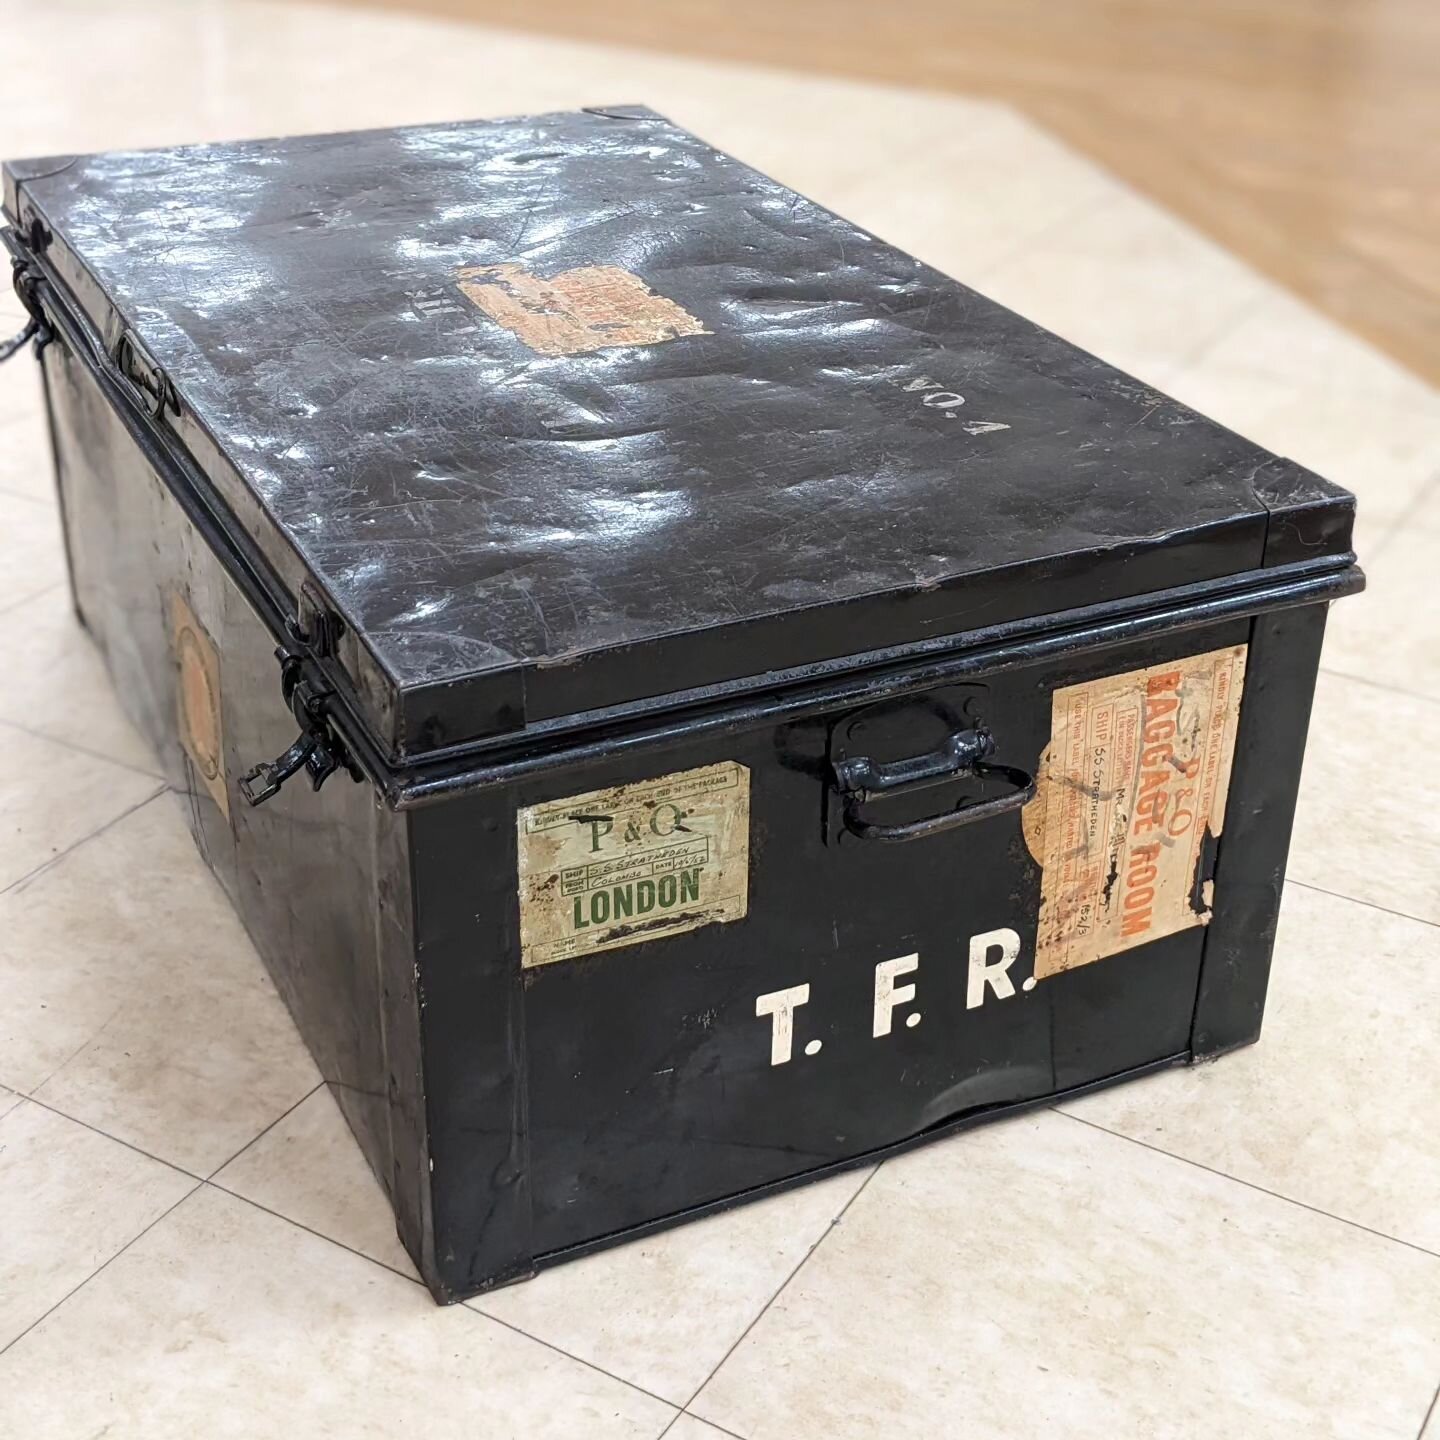 I have so many thoughts on 'stuff' and how it can be an incredible privilege and a huge burden to own things. I've touched on these topics in my bl0g in the past (link in bio ☝🏻) but this trunk is a case in point.
This piece of history was gifted to